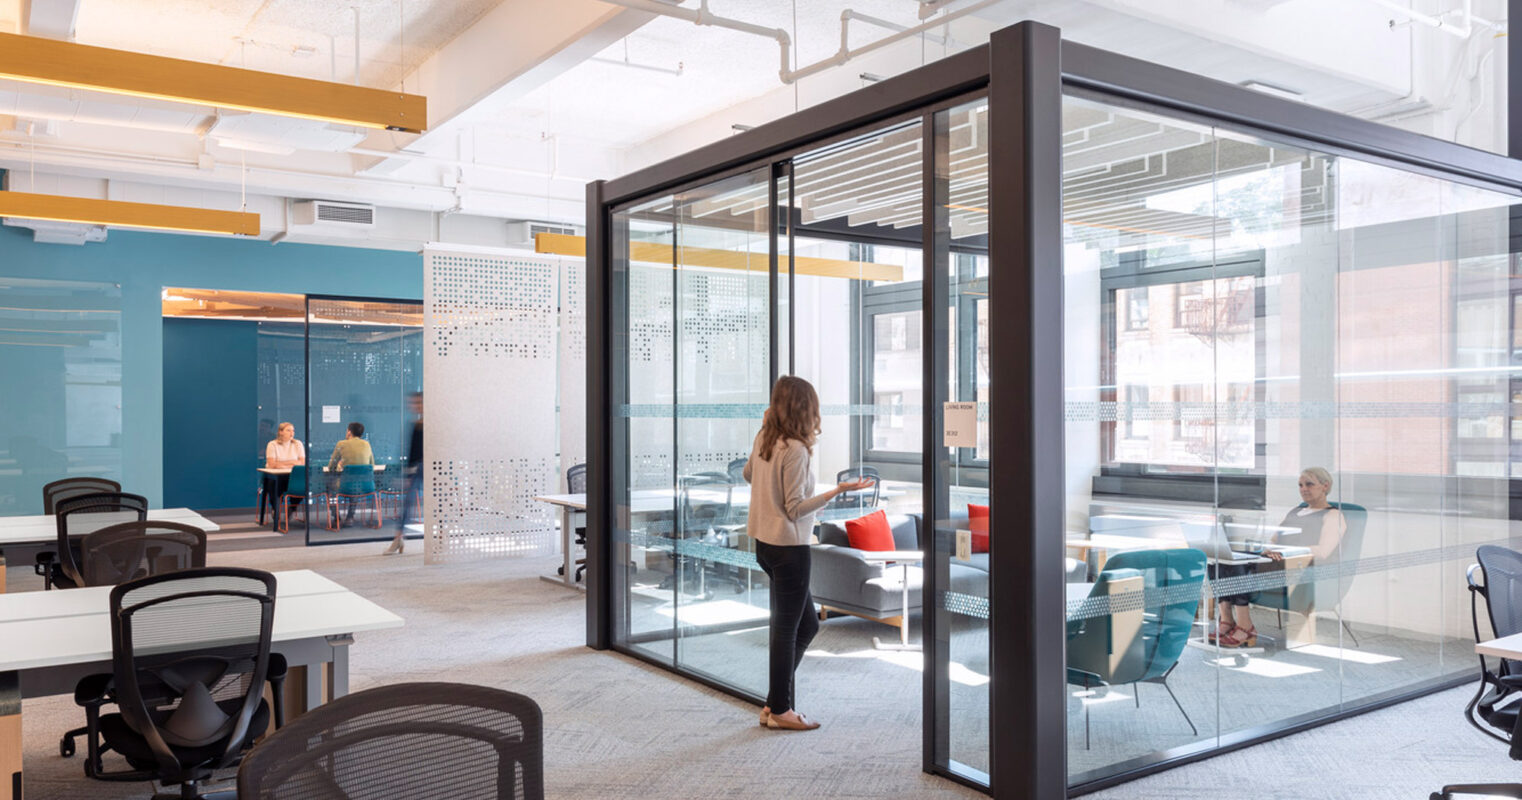 Modern open-plan office space featuring clear glass partitions, sleek black frames, and vibrant yellow accent walls. Natural light floods the area, highlighting the eclectic mix of collaborative workstations and private meeting rooms.